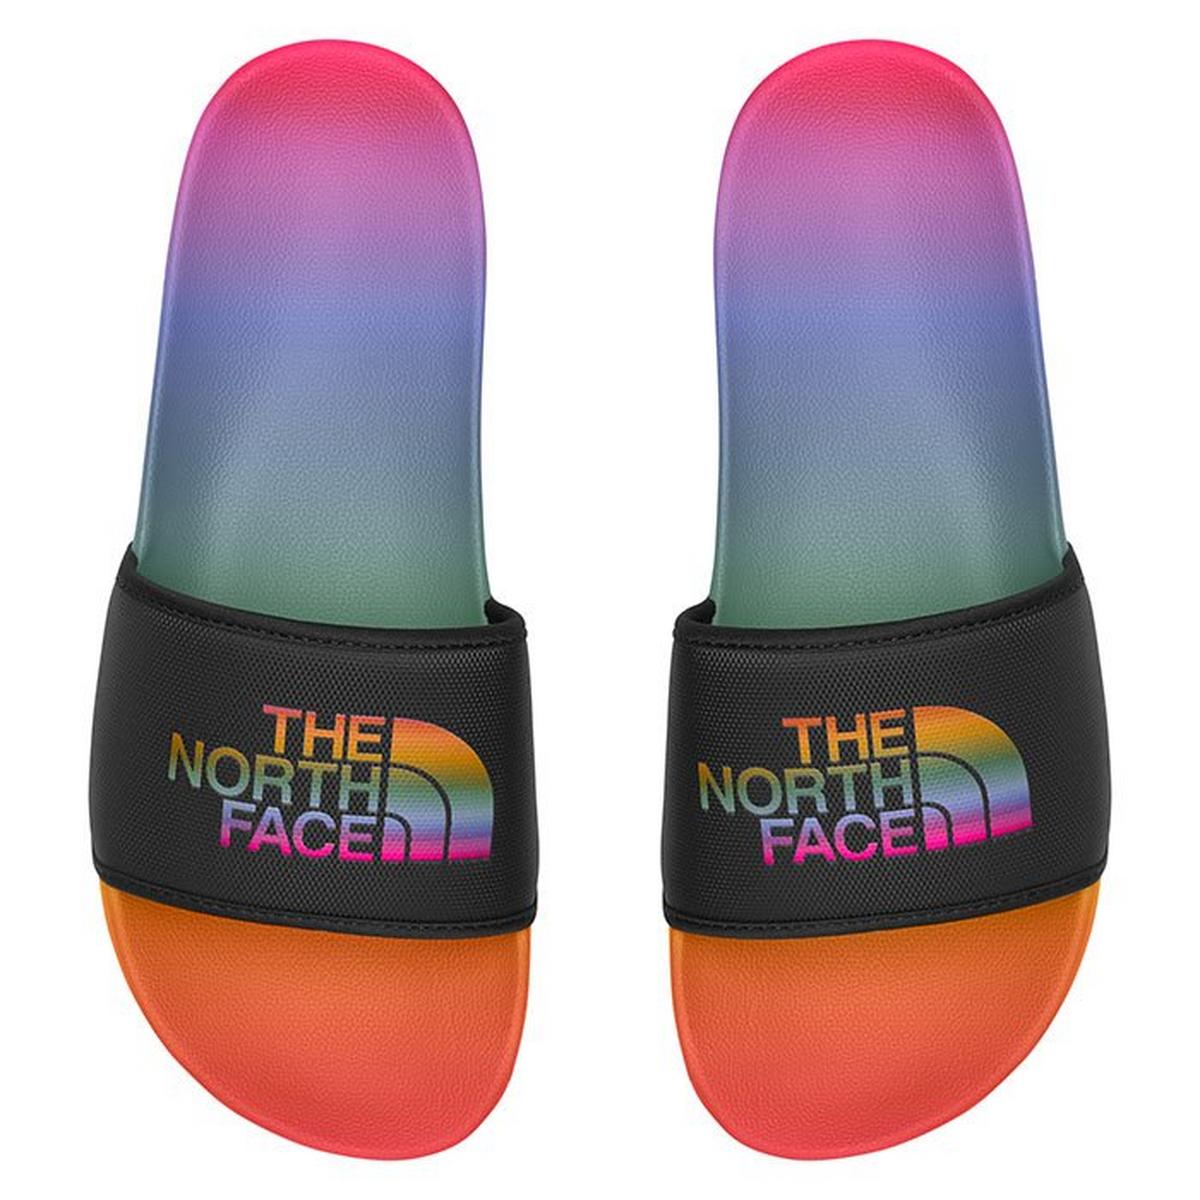 The North Face pride sandals